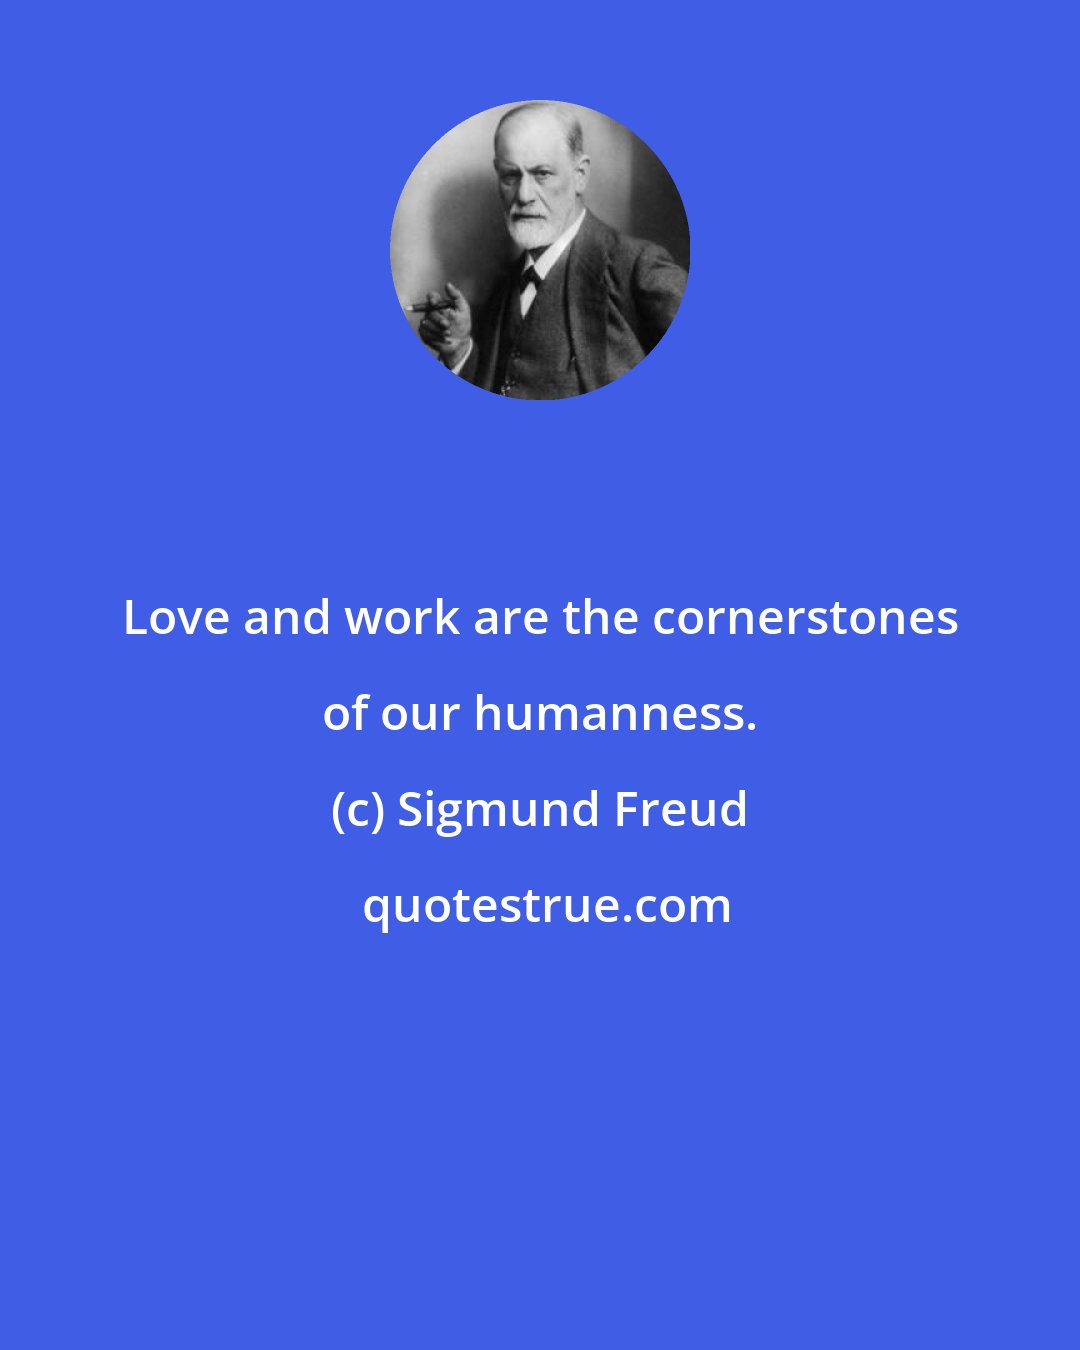 Sigmund Freud: Love and work are the cornerstones of our humanness.